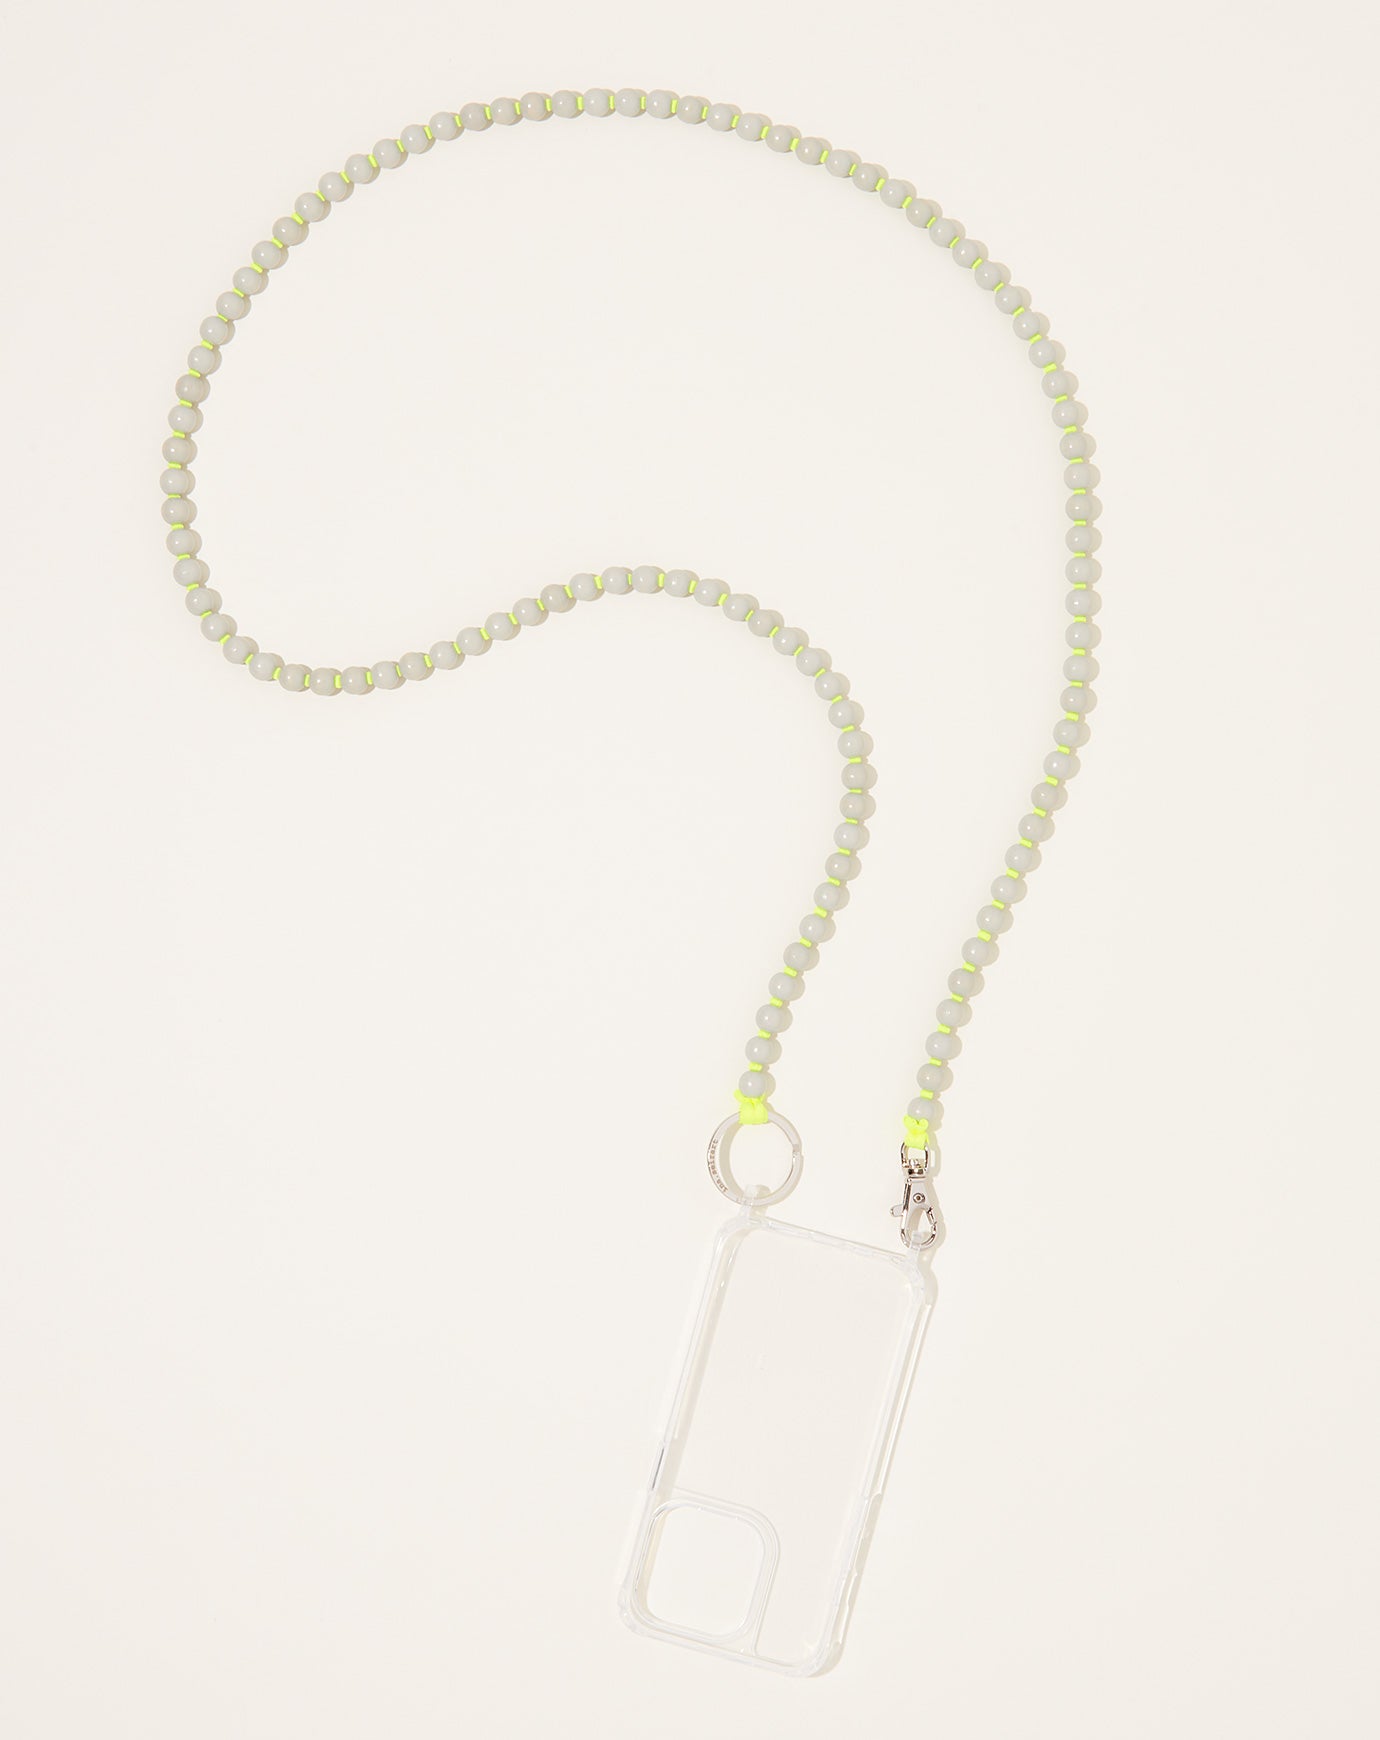 Ina Seifart Handykette iPhone Necklace in Light Grey on Neon Yellow